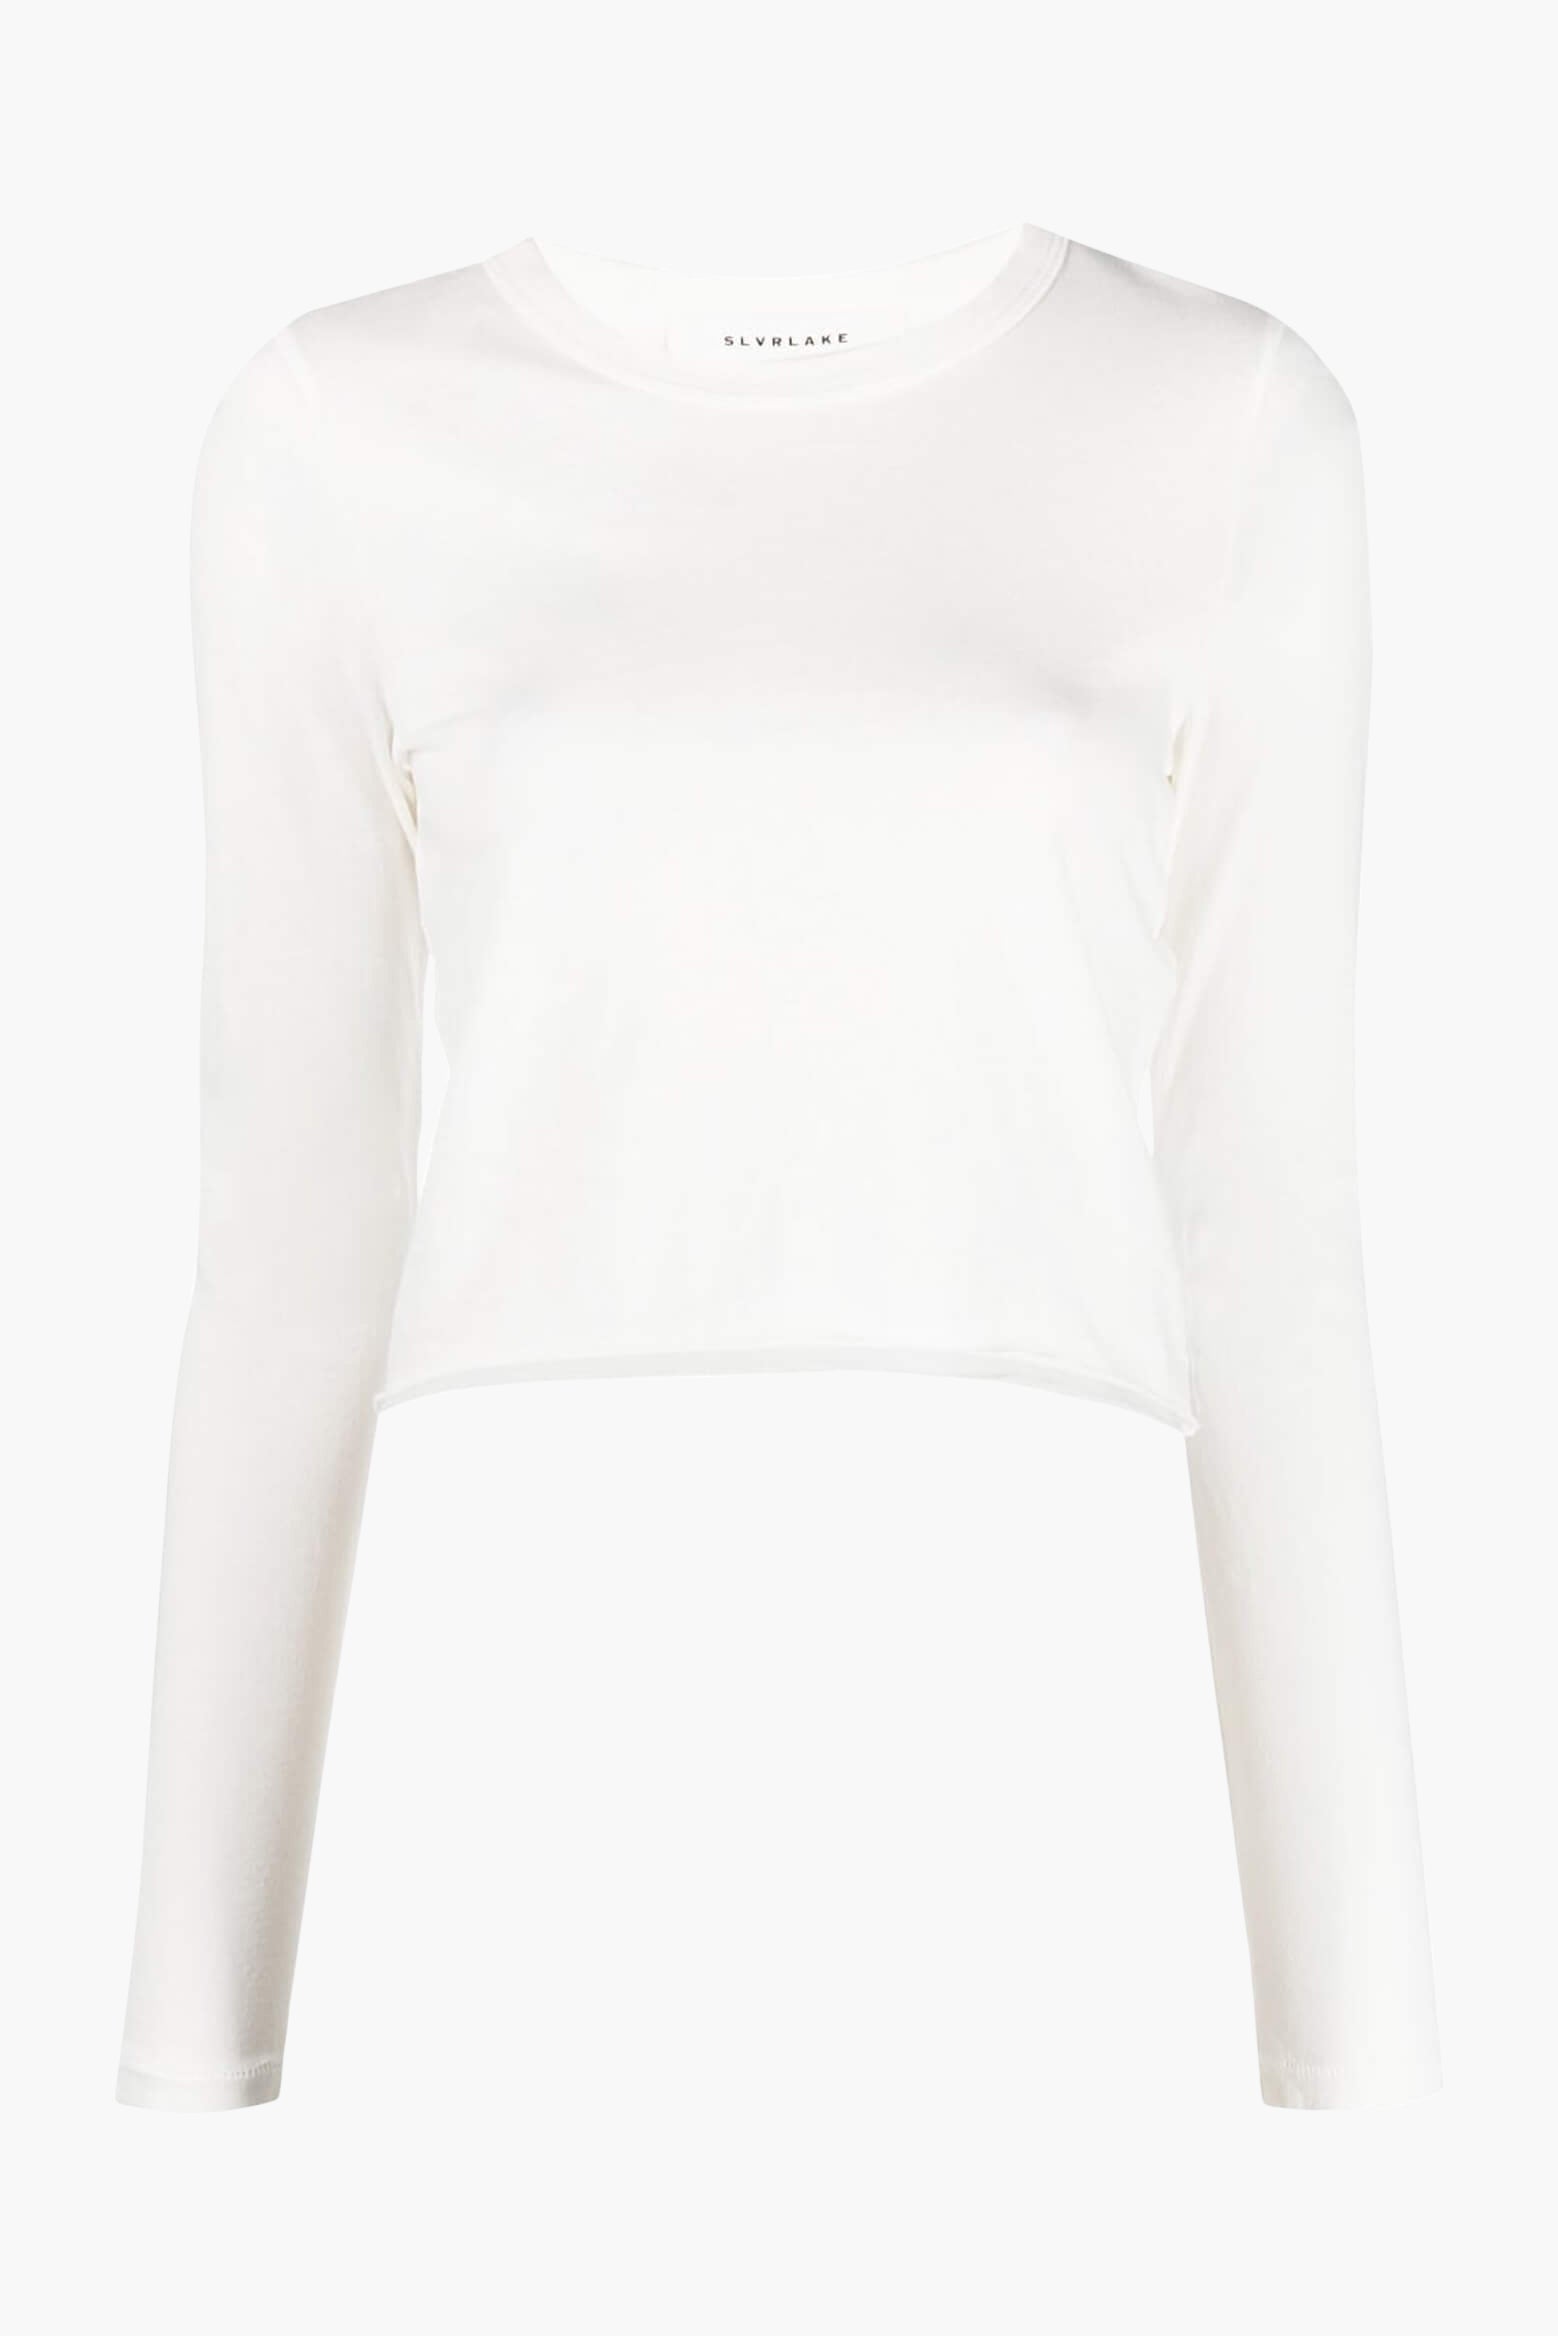 Slvrlake Long Sleeve Baby Tee in Natural White available at TNT The New Trend Australia.